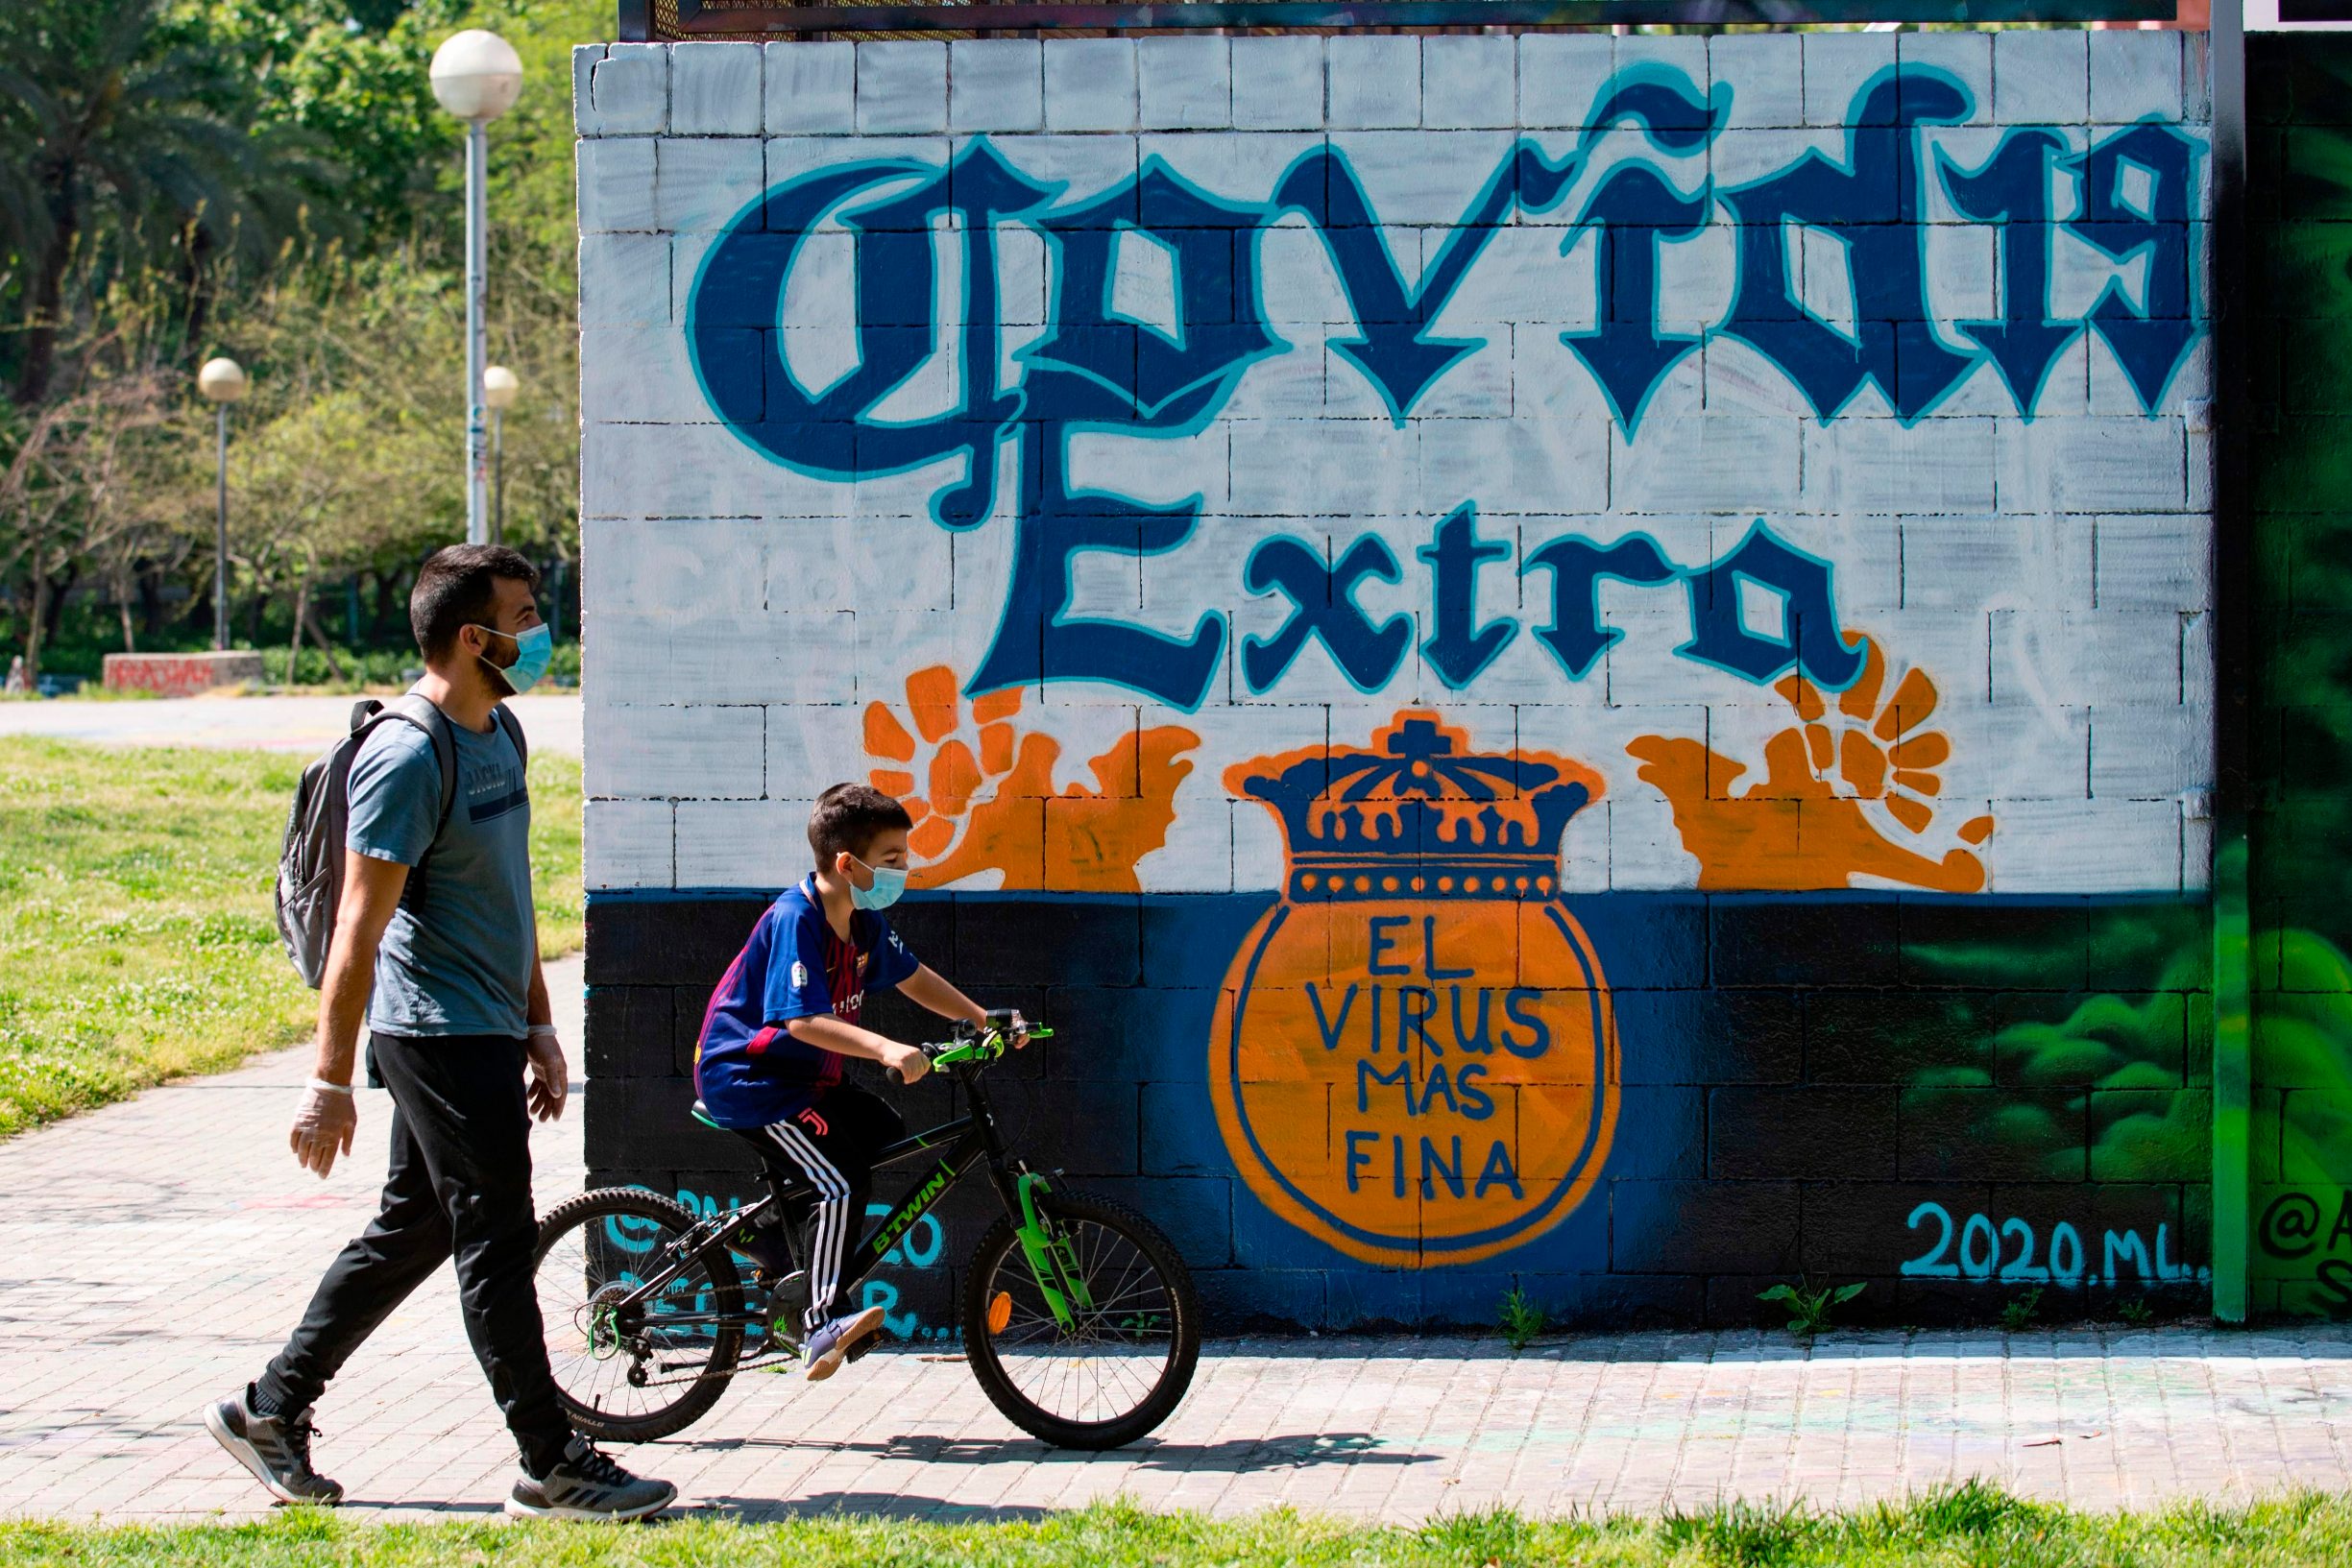 A boys rides his bike beside his father as they walk past a COVID-19 graffiti in Barcelona  on April 26, 2020 amid a national lockdown to prevent the spread of the COVID-19 disease. - After six weeks stuck at home, Spain's children were being allowed out today to run, play or go for a walk as the government eased one of the world's toughest coronavirus lockdowns. Spain is one of the hardest hit countries, with a death toll running a more than 23,000 to put it behind only the United States and Italy despite stringent restrictions imposed from March 14, including keeping all children indoors. Today, with their scooters, tricycles or in prams, the children accompanied by their parents came out onto largely deserted streets. (Photo by Josep LAGO / AFP)